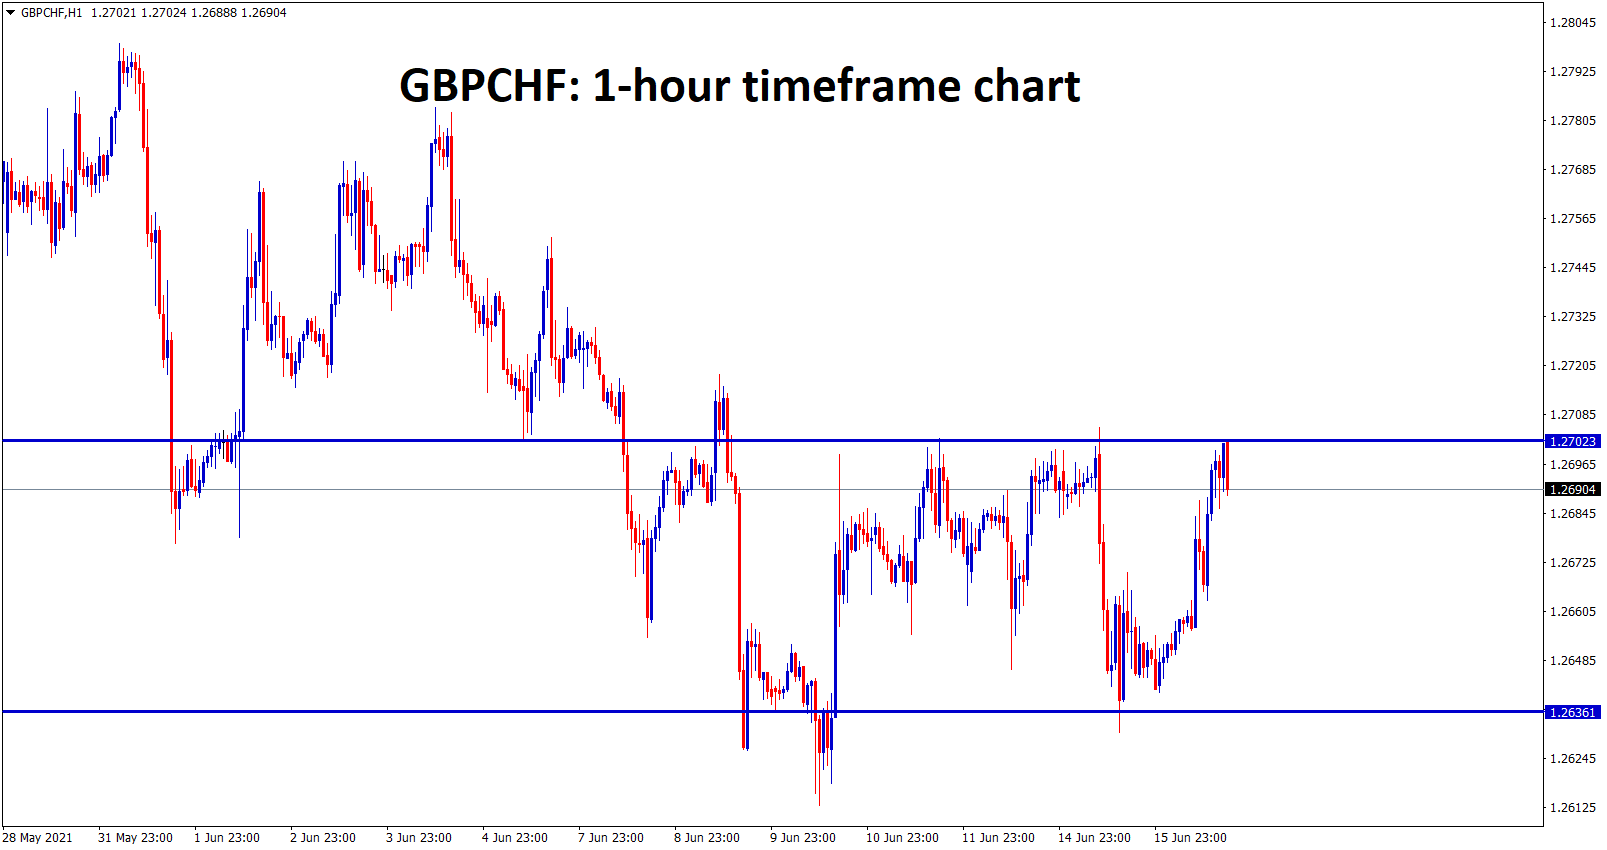 GBPCHF is moving between the ranges now in the correction mode